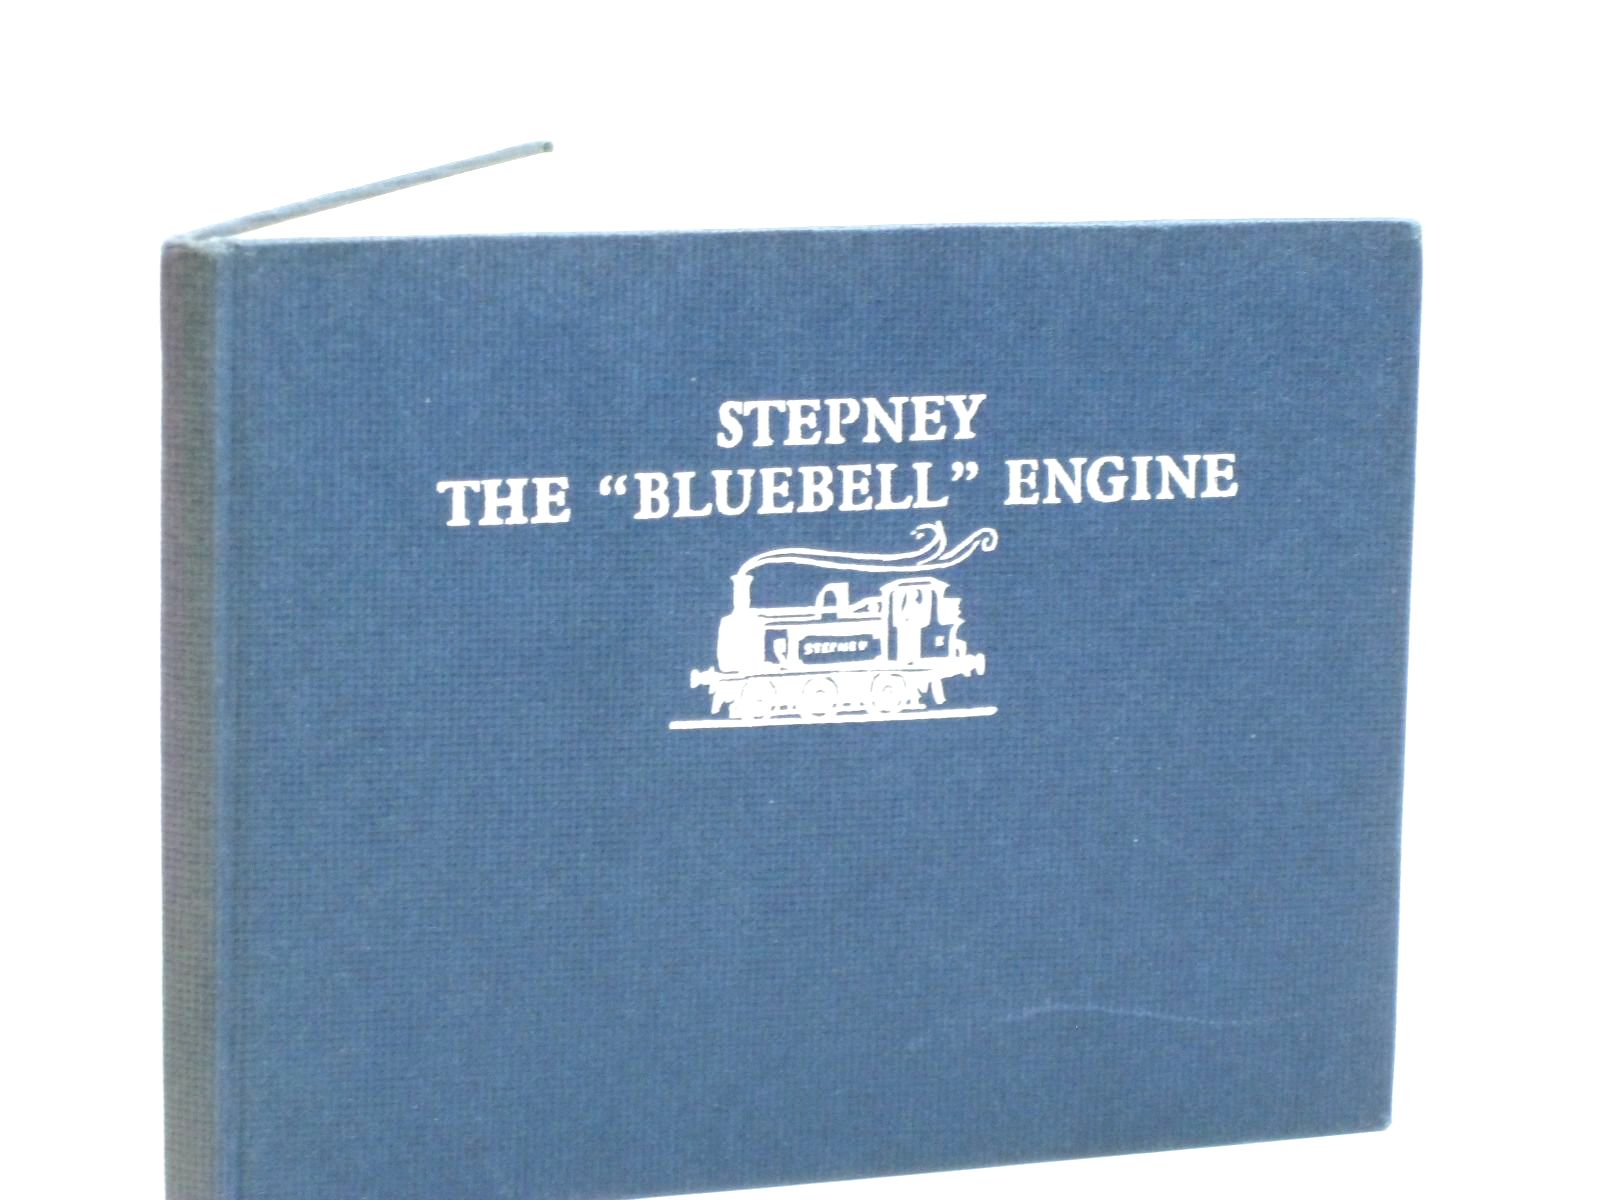 Photo of STEPNEY THE BLUEBELL ENGINE written by Awdry, Rev. W. illustrated by Edwards, Gunvor
Edwards, Peter published by Edmund Ward Ltd. (STOCK CODE: 1405496)  for sale by Stella & Rose's Books